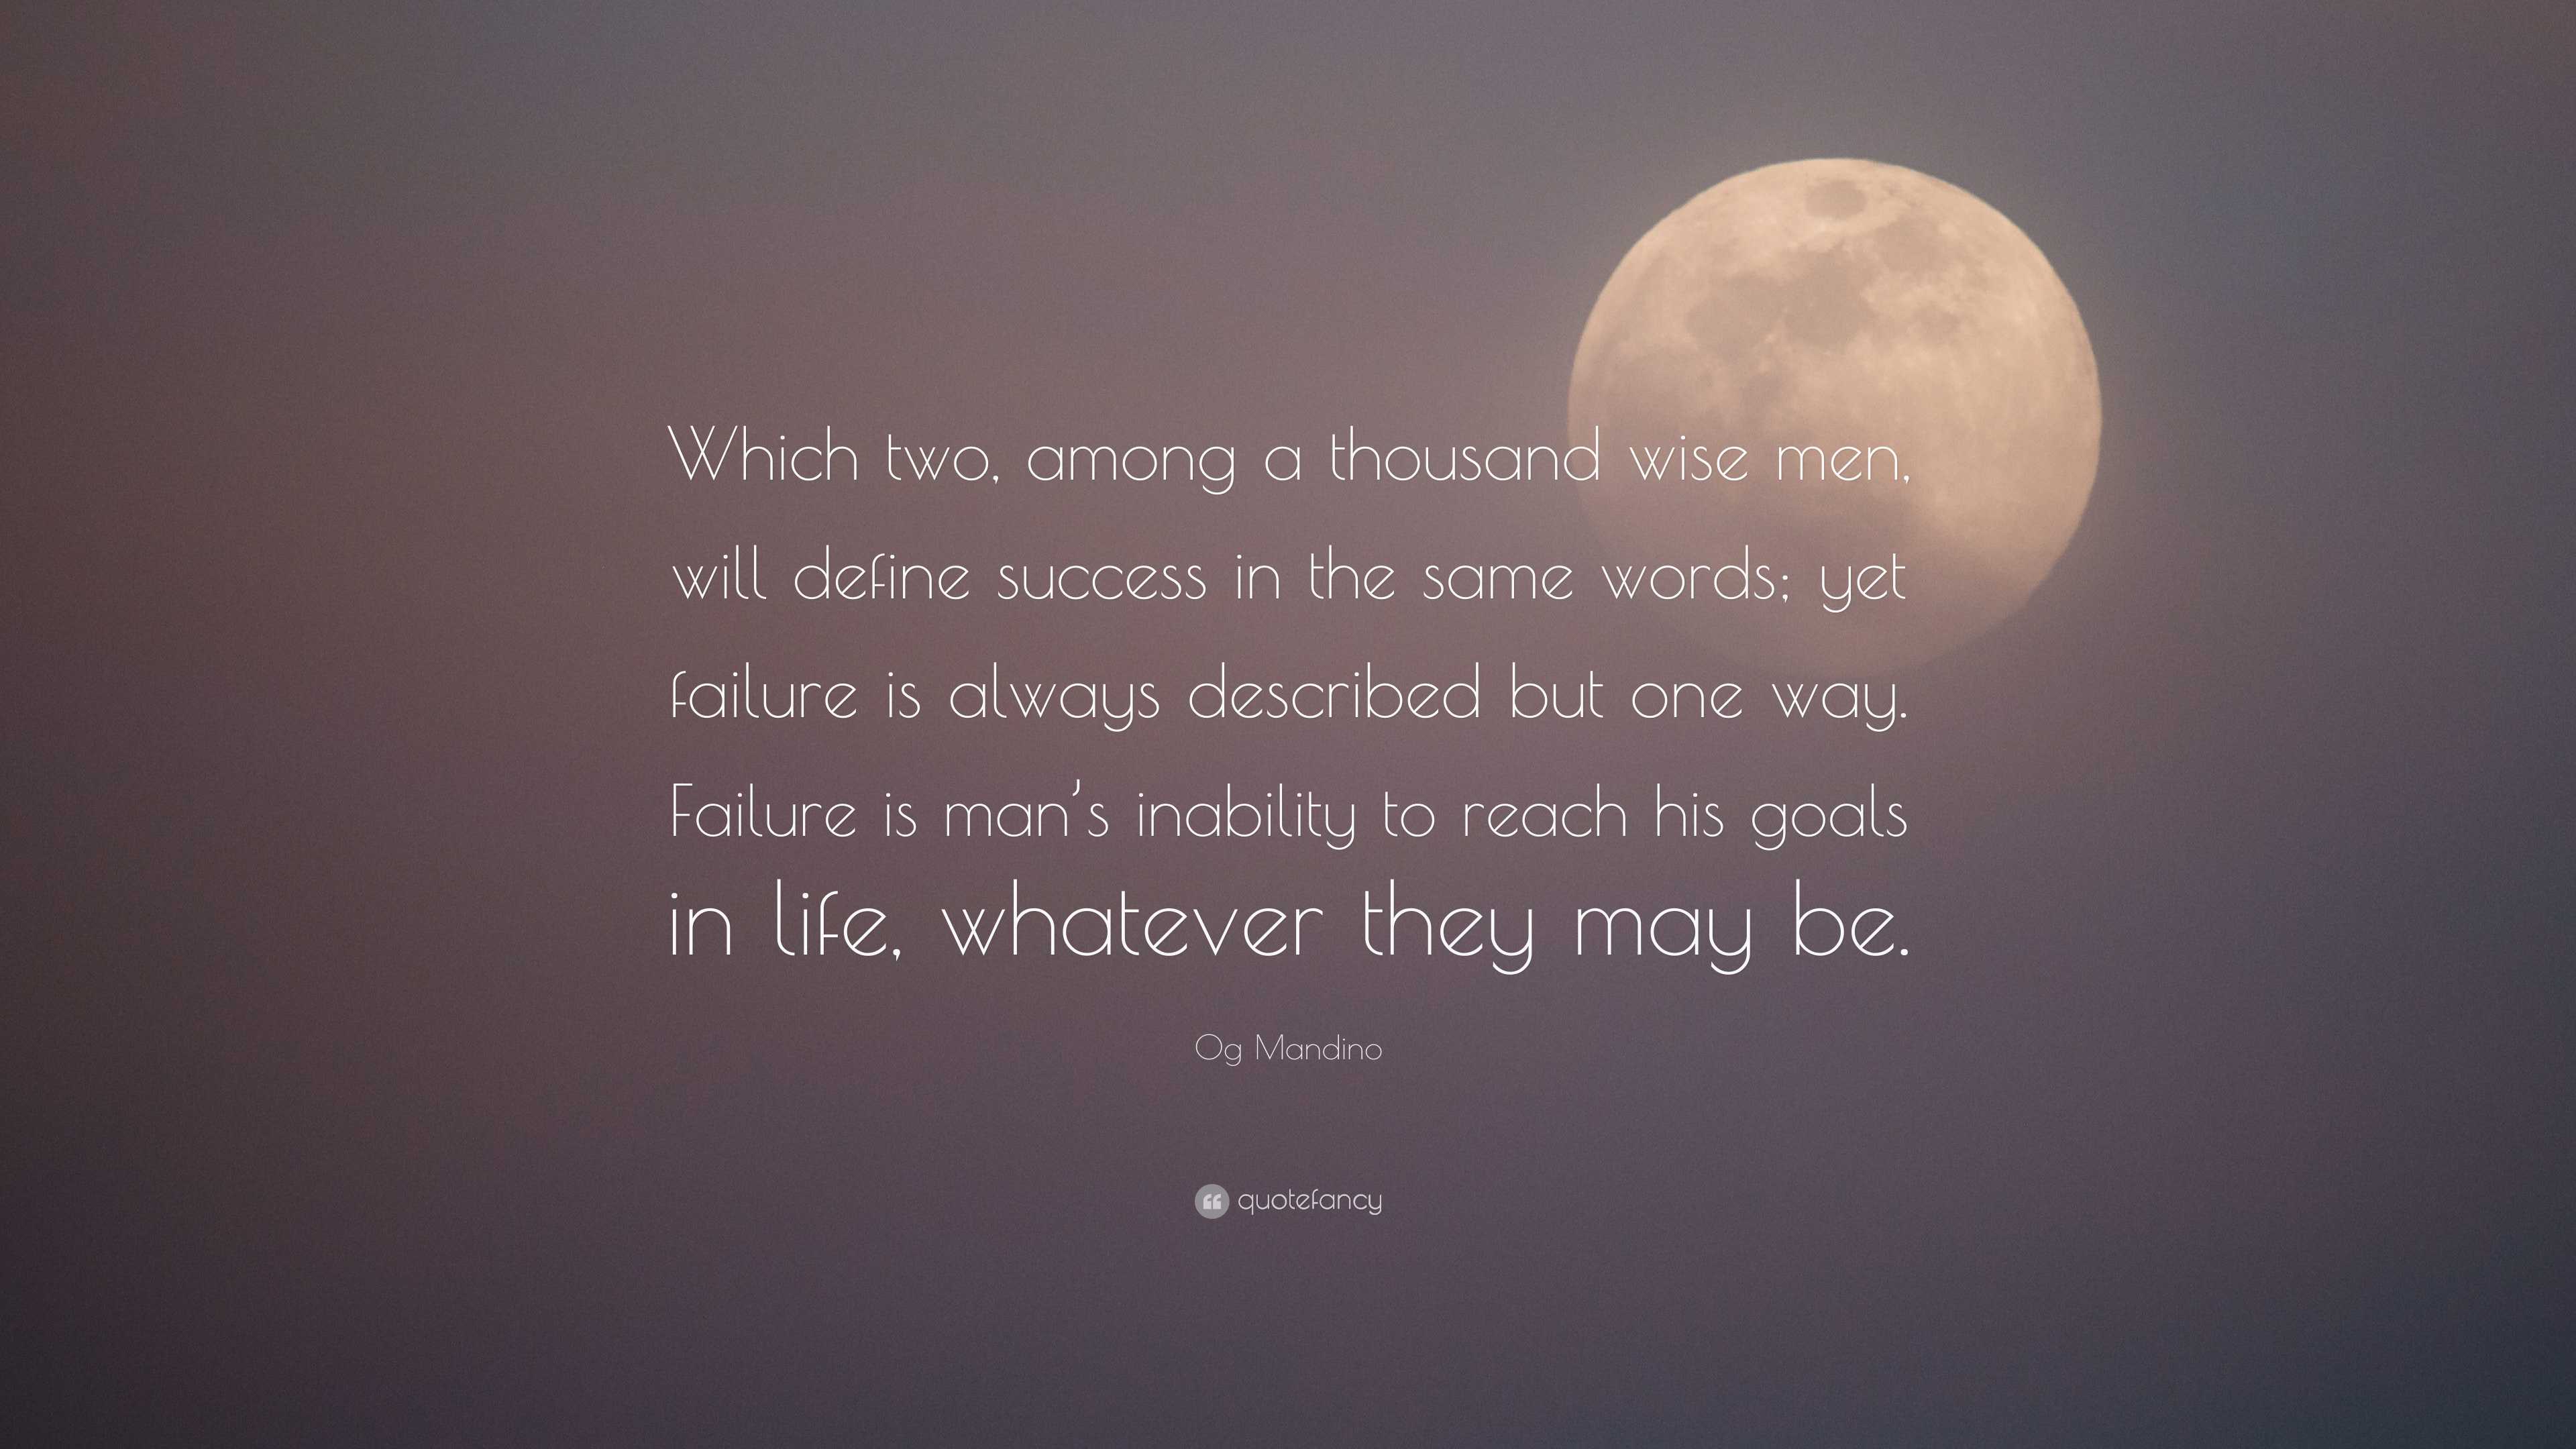 Og Mandino Quote: “Which two, among a thousand wise men, will define ...